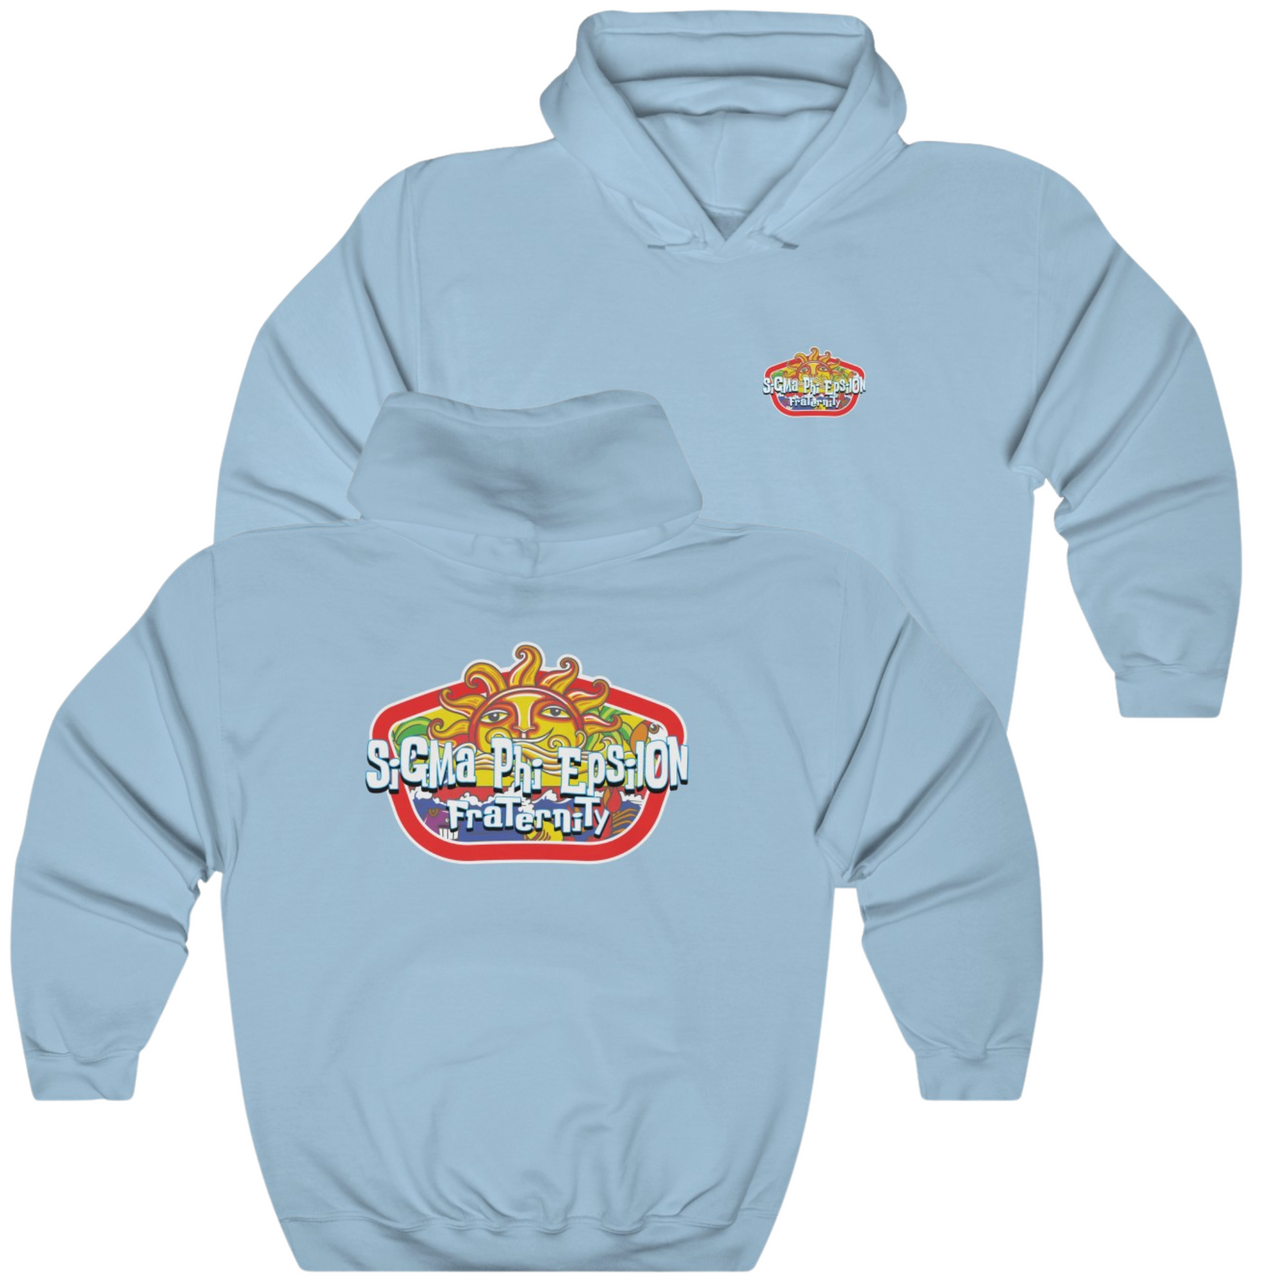 Light Blue Sigma Phi Epsilon Graphic Hoodie | Summer Sol | SigEp Fraternity Clothes and Merchandise